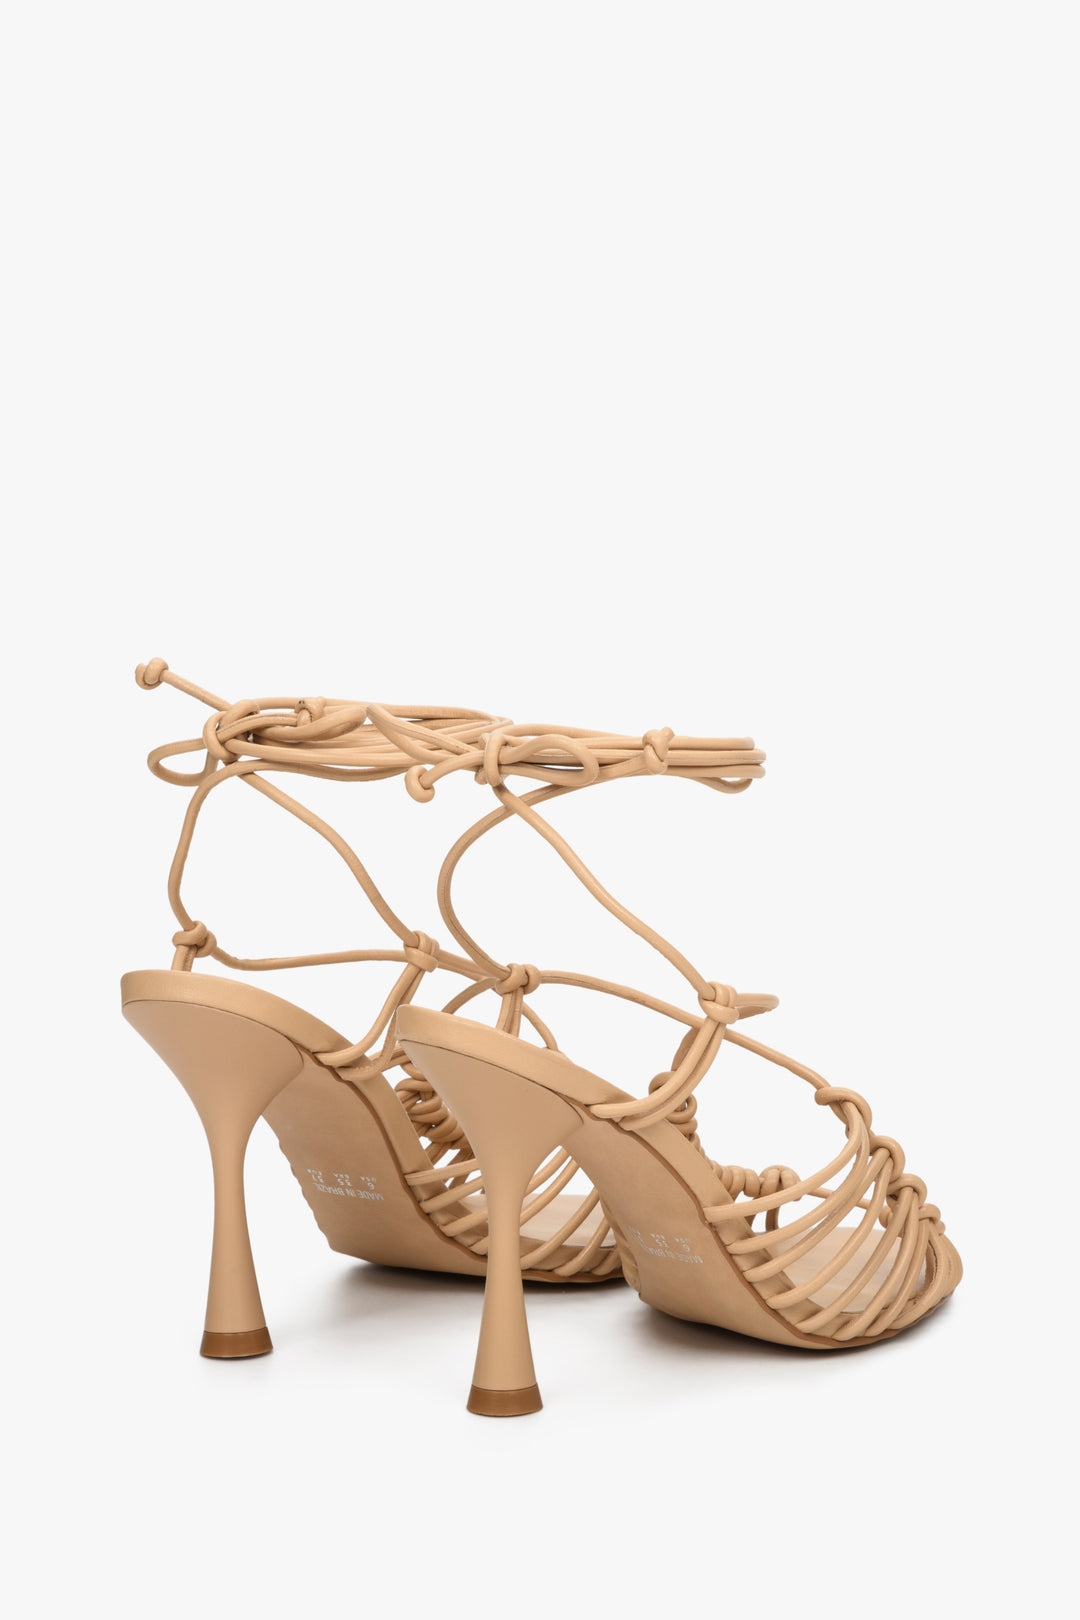 Beige, laced, woven women's high heel sandals by Estro - close-up on the back of the shoe.